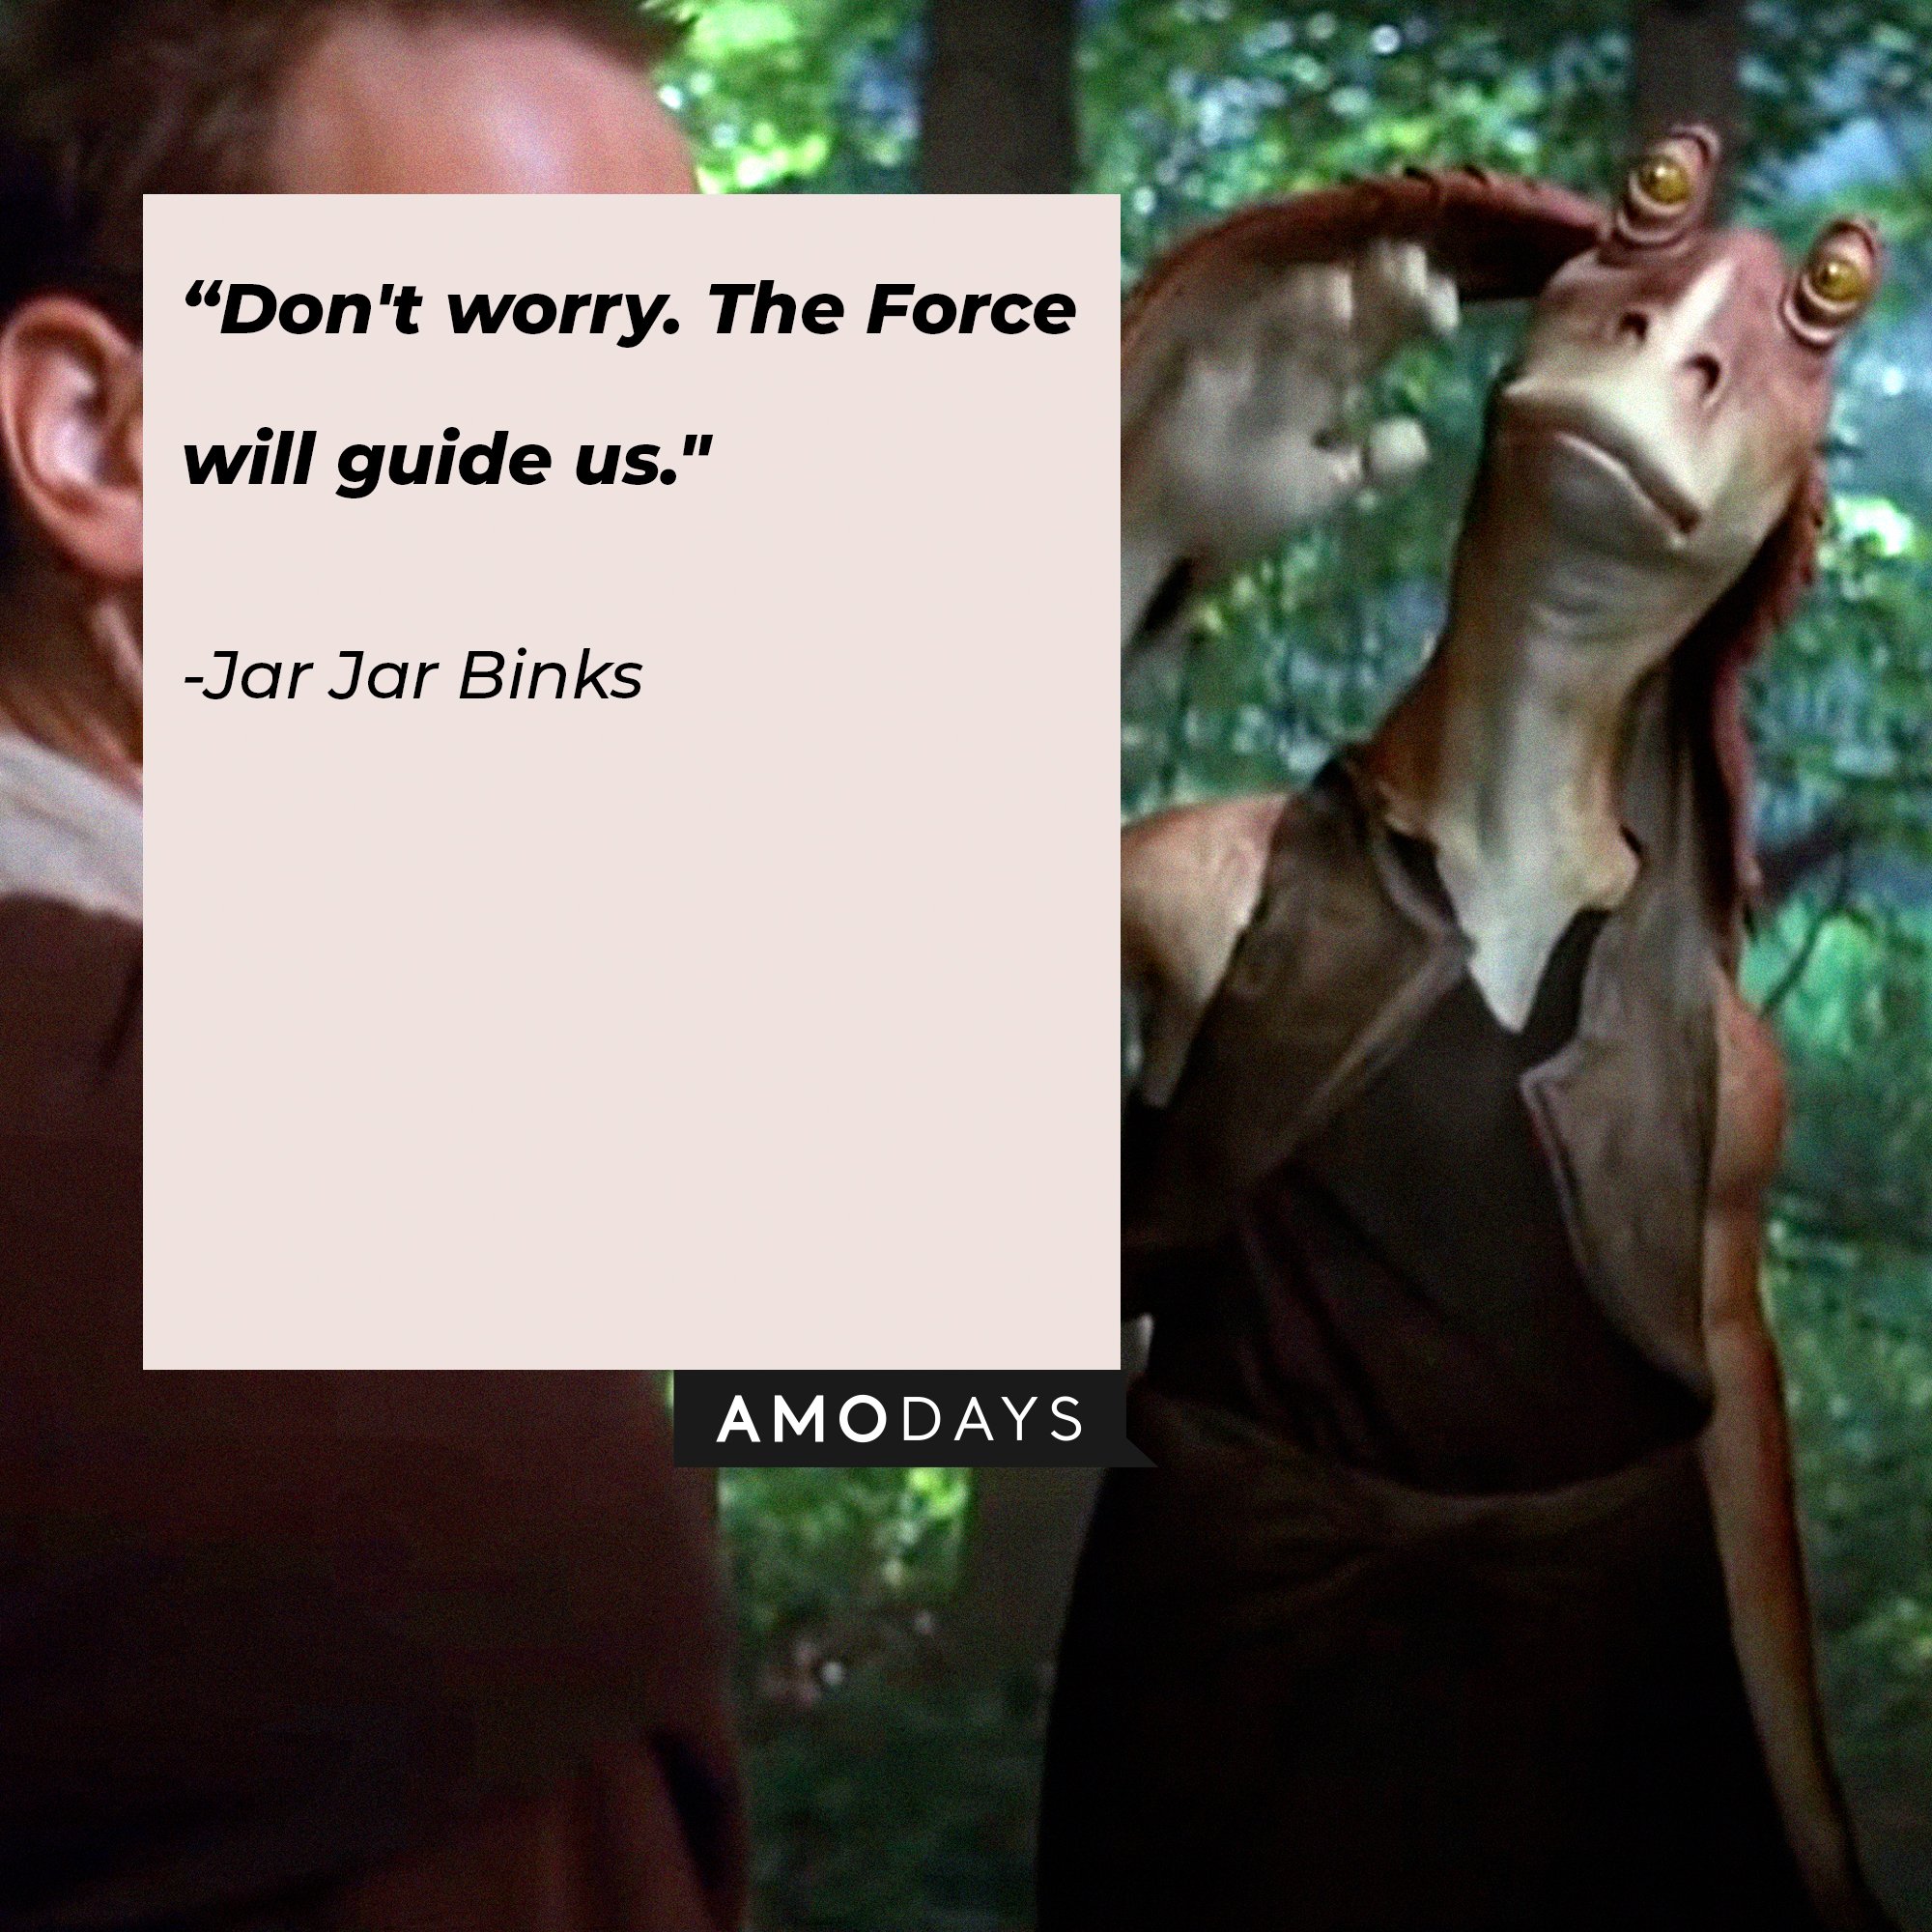  Jar Jar Binks’ quote: “Don't worry. The Force will guide us." | Image: AmoDays